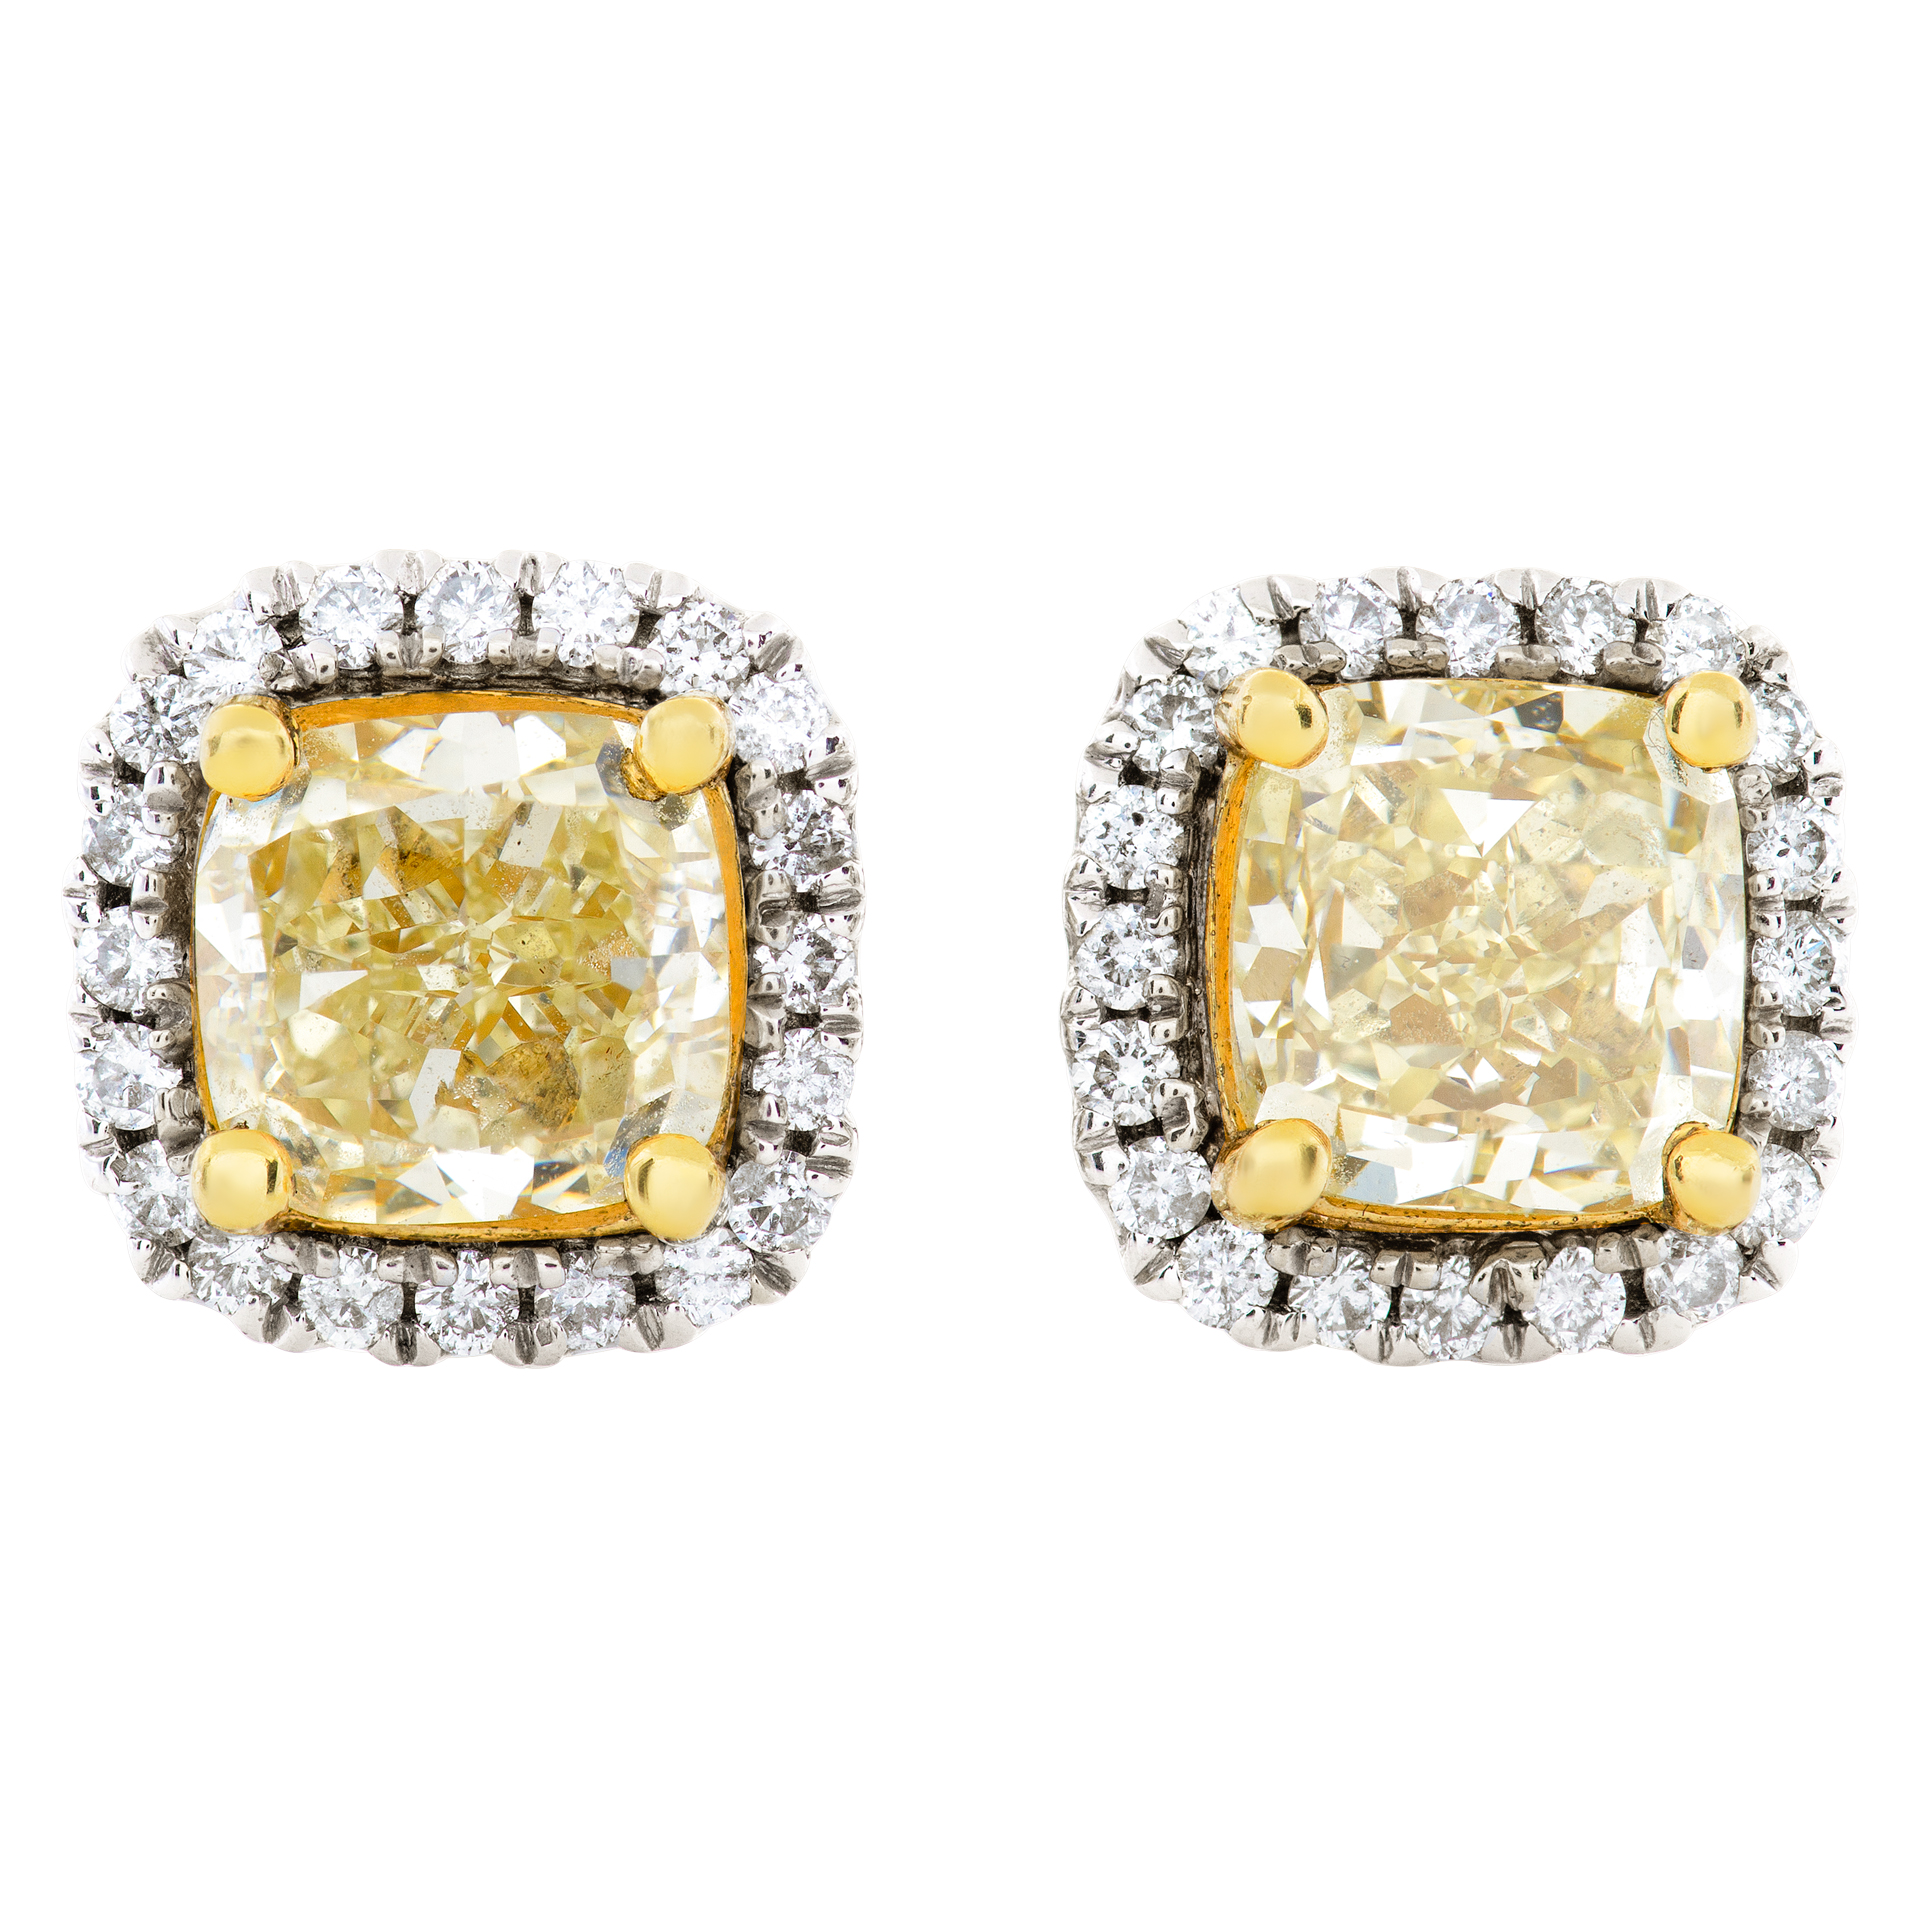 18k White and yellow gold diamond studs with 1.30 & 1.33 carats in yellow diamond image 1